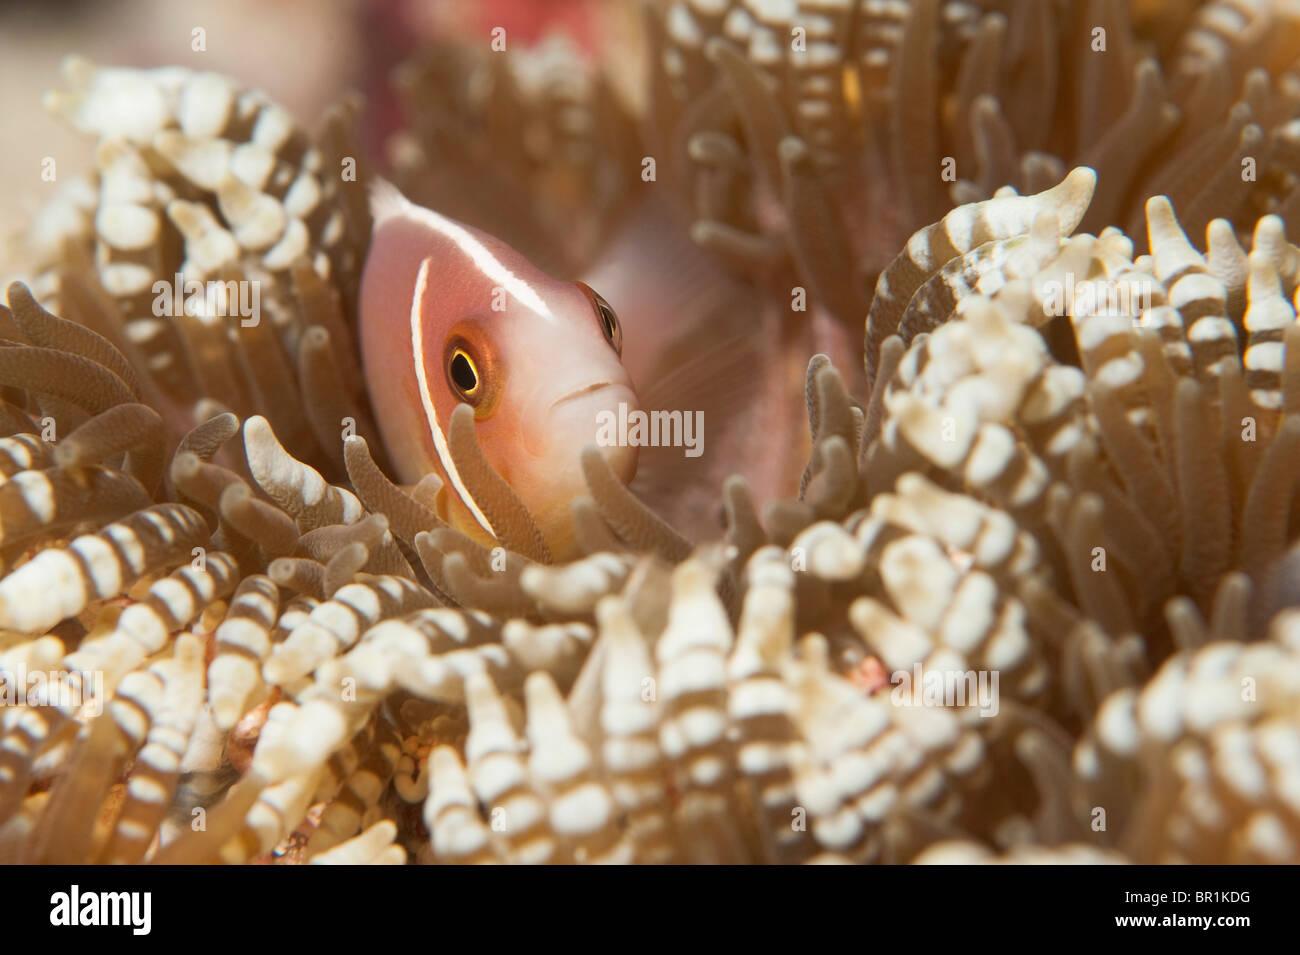 A Pink Anemonefish in a Beaded Sea Anemone on a reef in Indonesia. Stock Photo